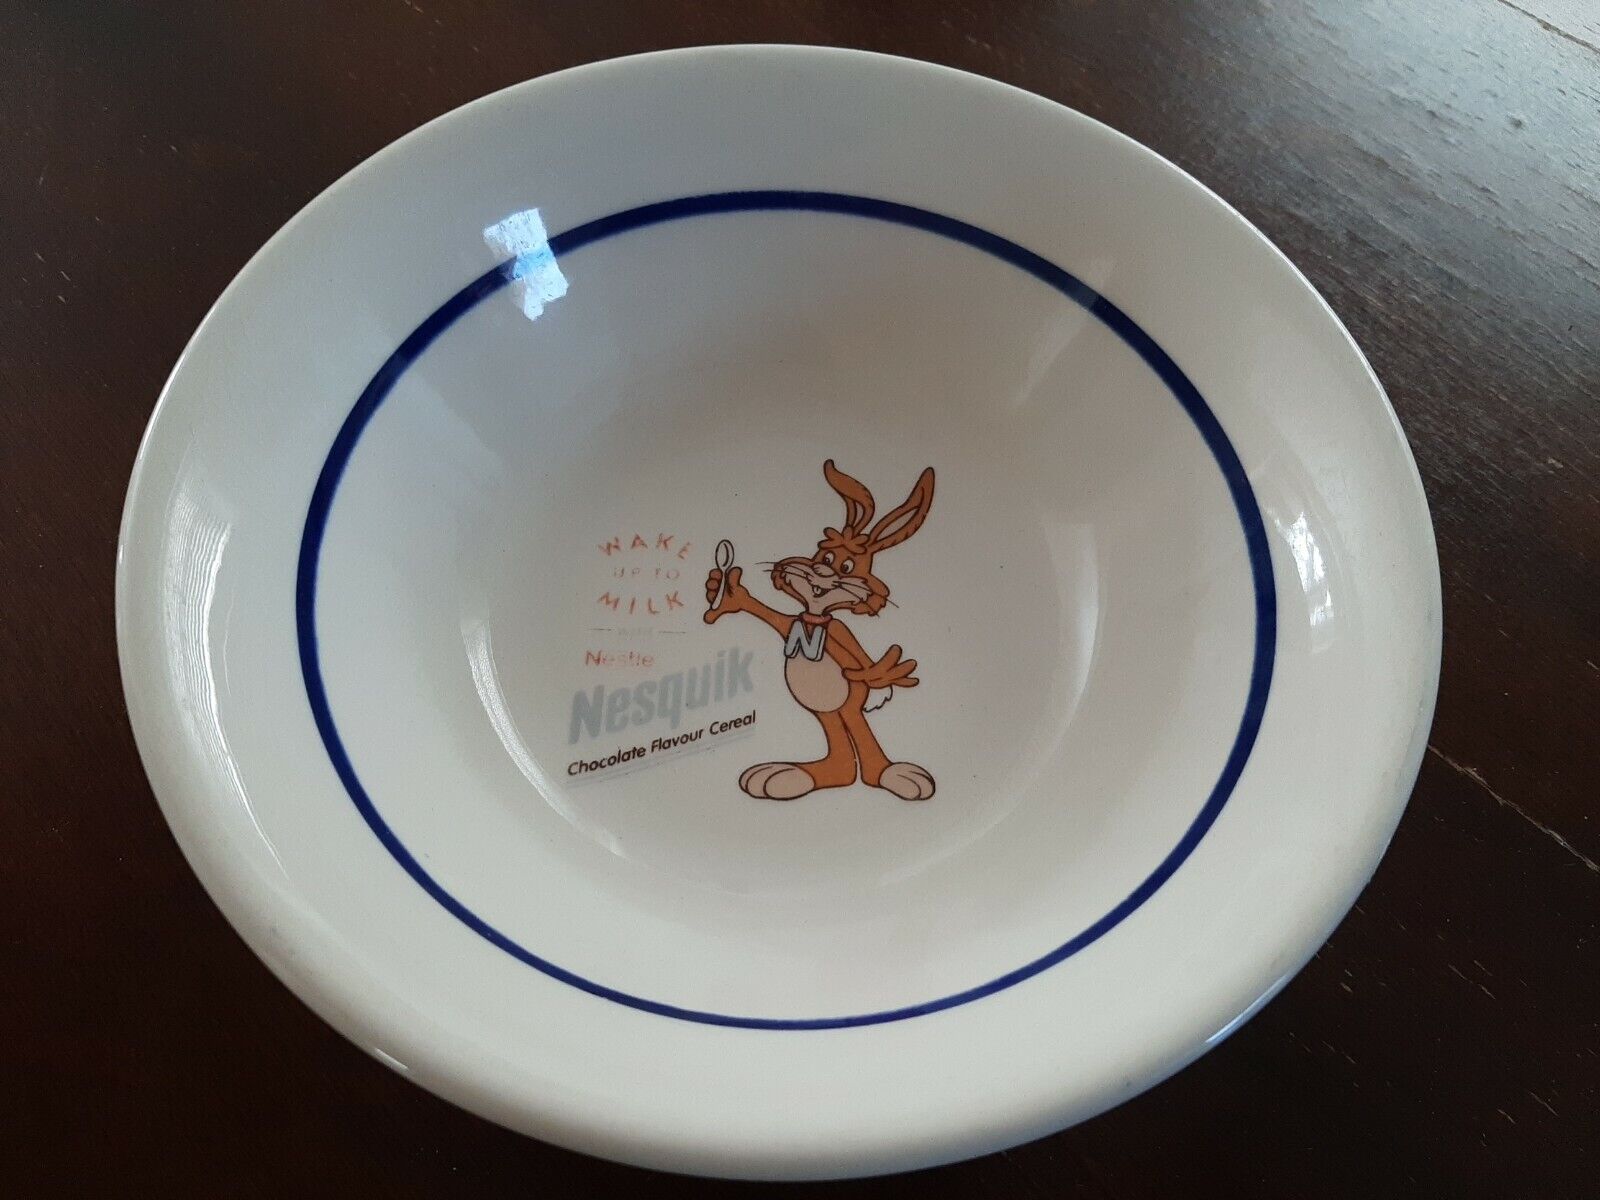 E.I.T Cereal Bowl Nesquick Cereal Advertising